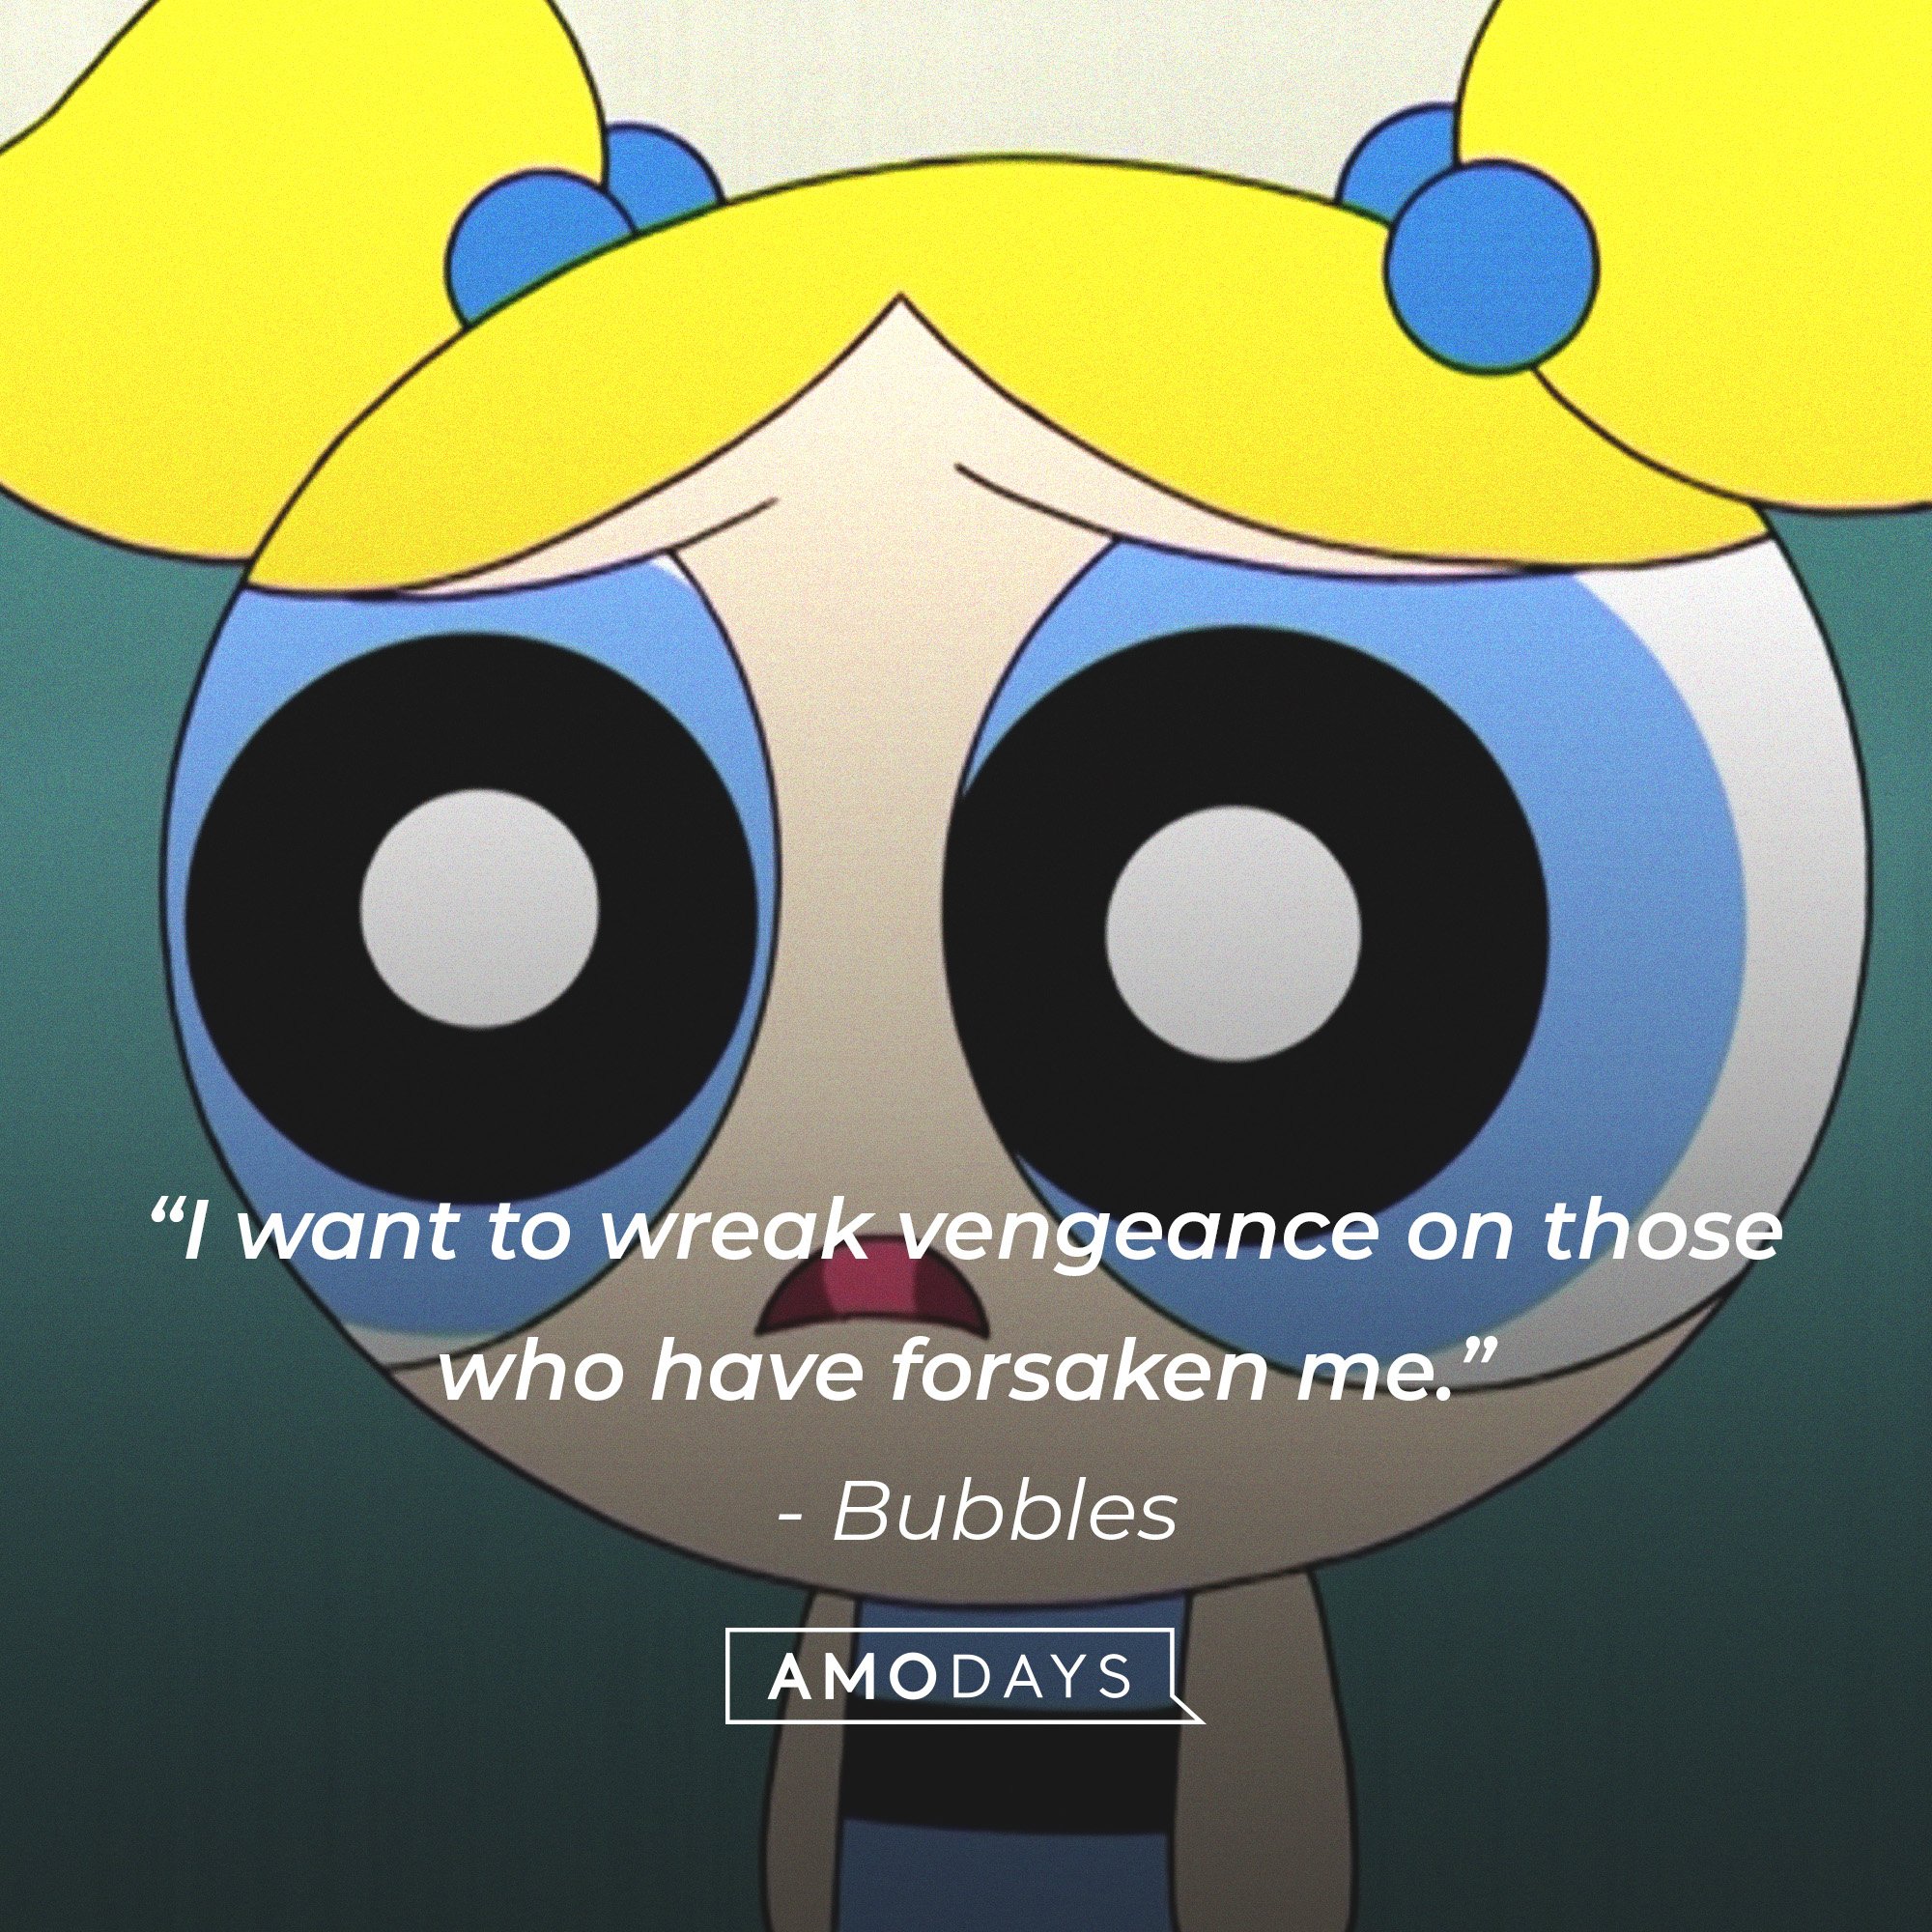 Bubble’s quote: “I want to wreak vengeance on those who have forsaken me.” | Image: AmoDays